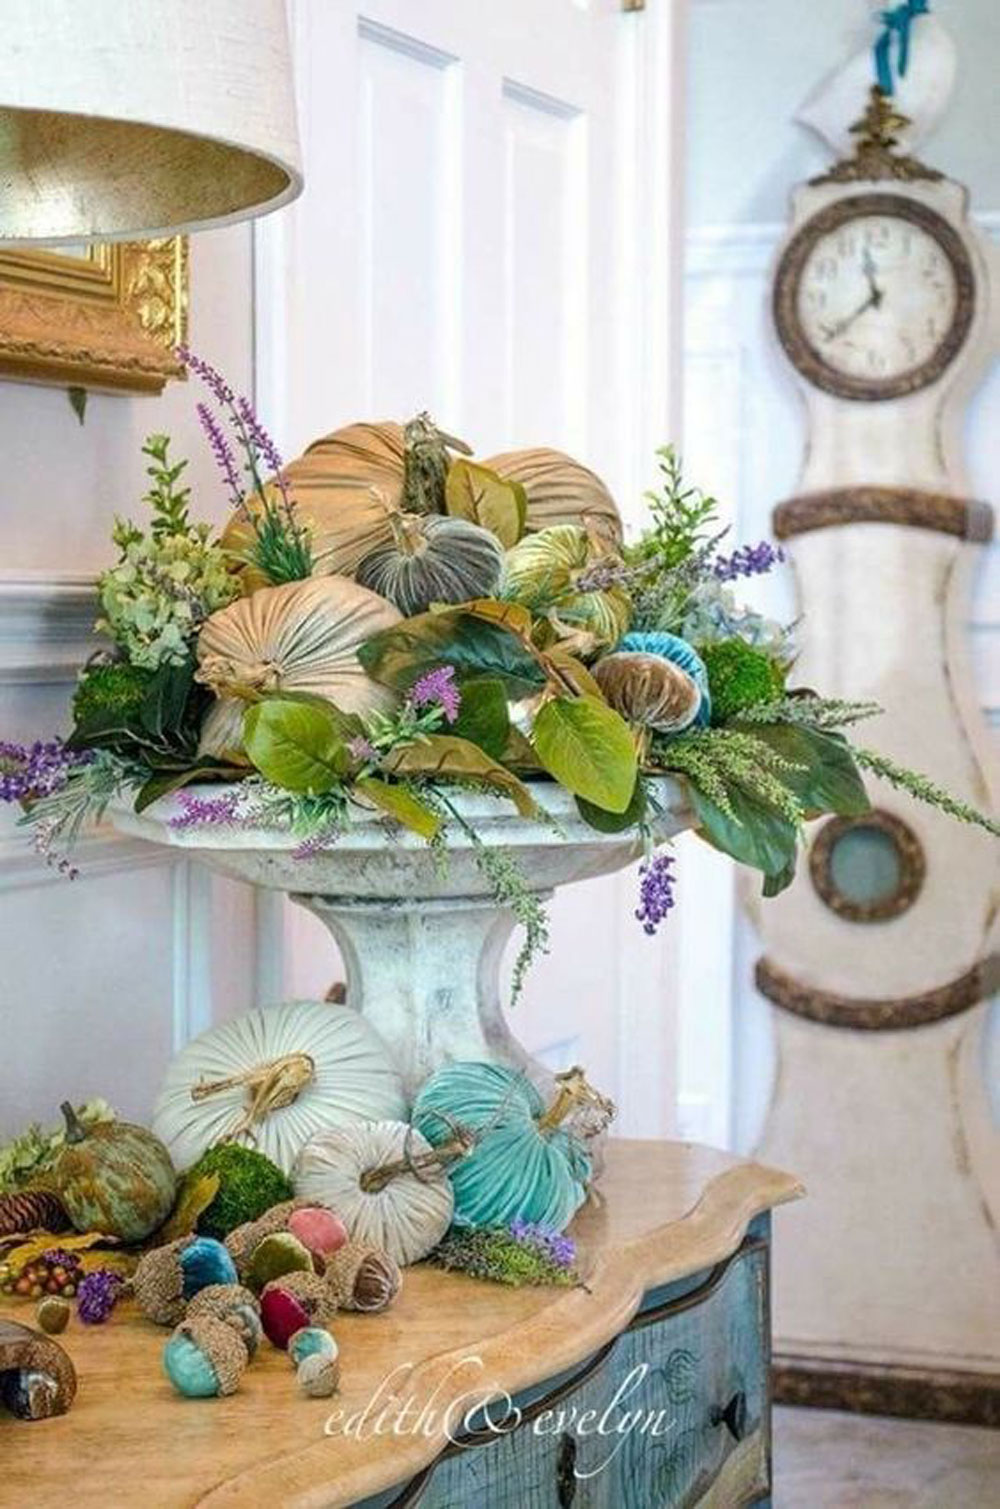 Colorful Fall Decor Ideas in turquoise and greens.